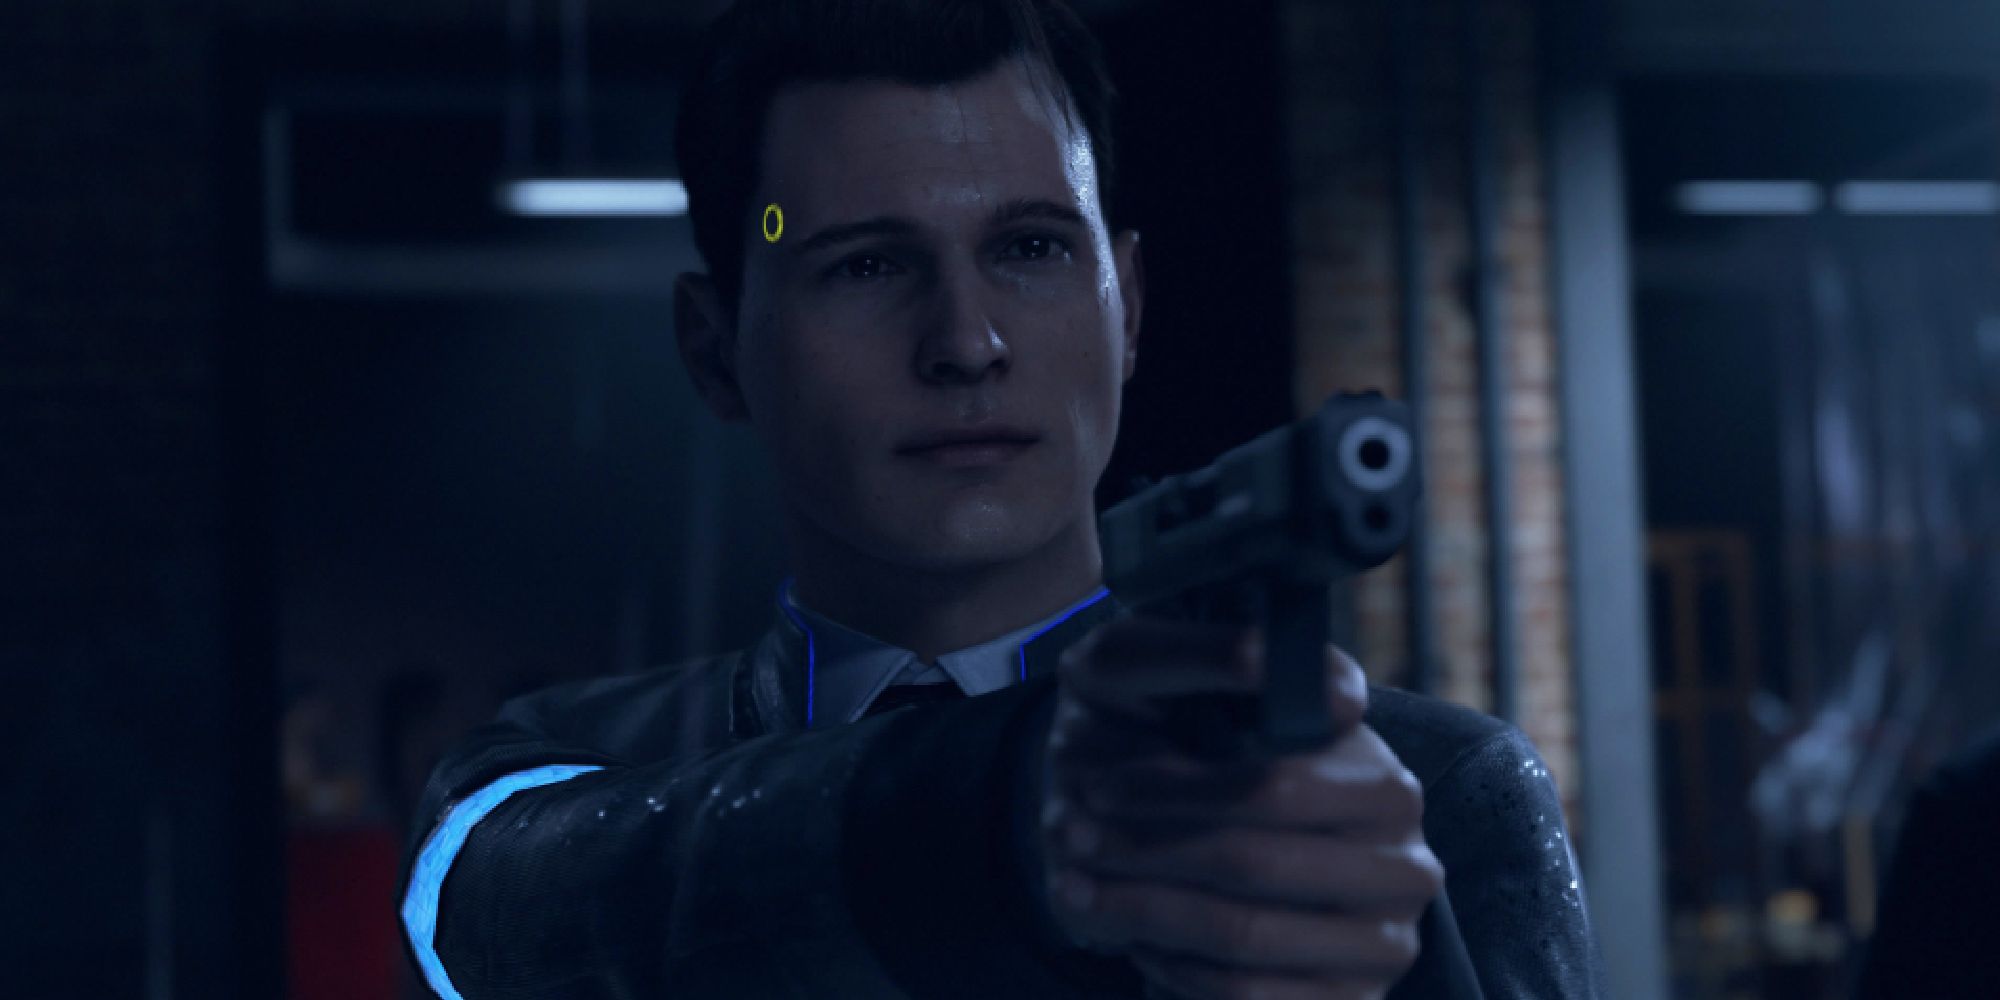 Connor pointing a gun at someone unseen, his expression neutral but the light on his temple yellow to represent his uncertain state of mind.